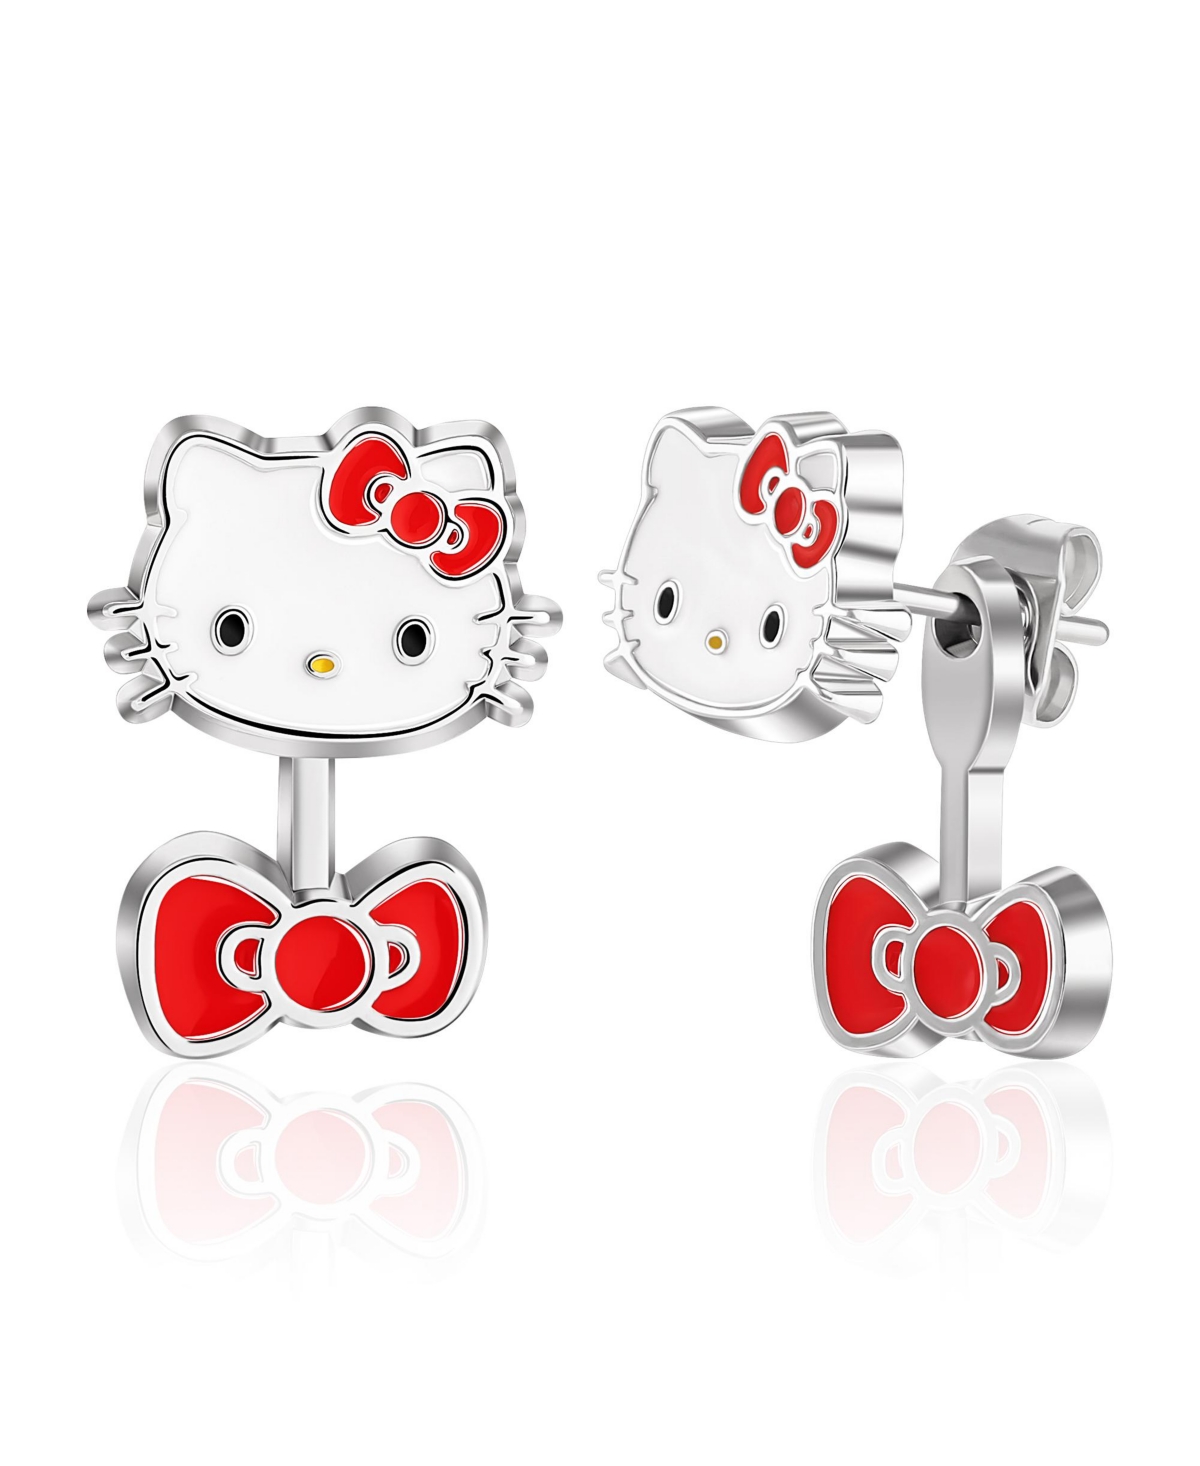 Sanrio Hello Kitty Fashion Rhodium Plated Front Back Earrings, Officially Licensed - Silver tone, red, white